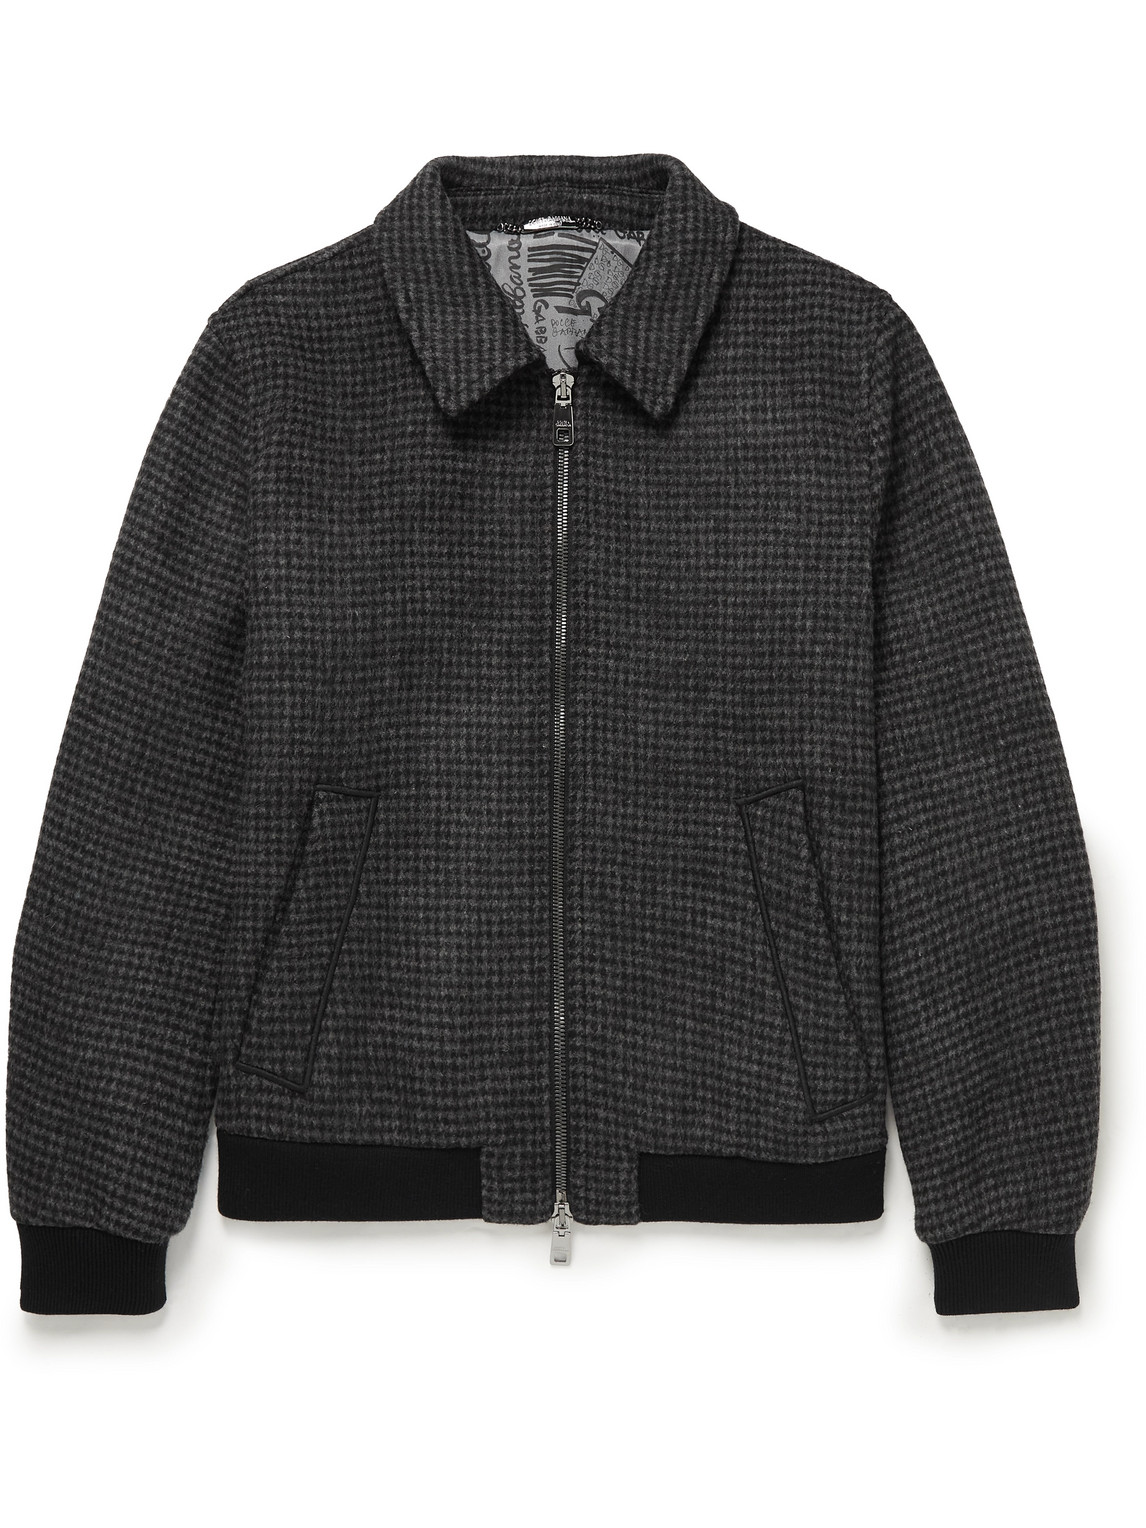 Dolce & Gabbana Houndstooth Wool-blend Bomber Jacket In Gray